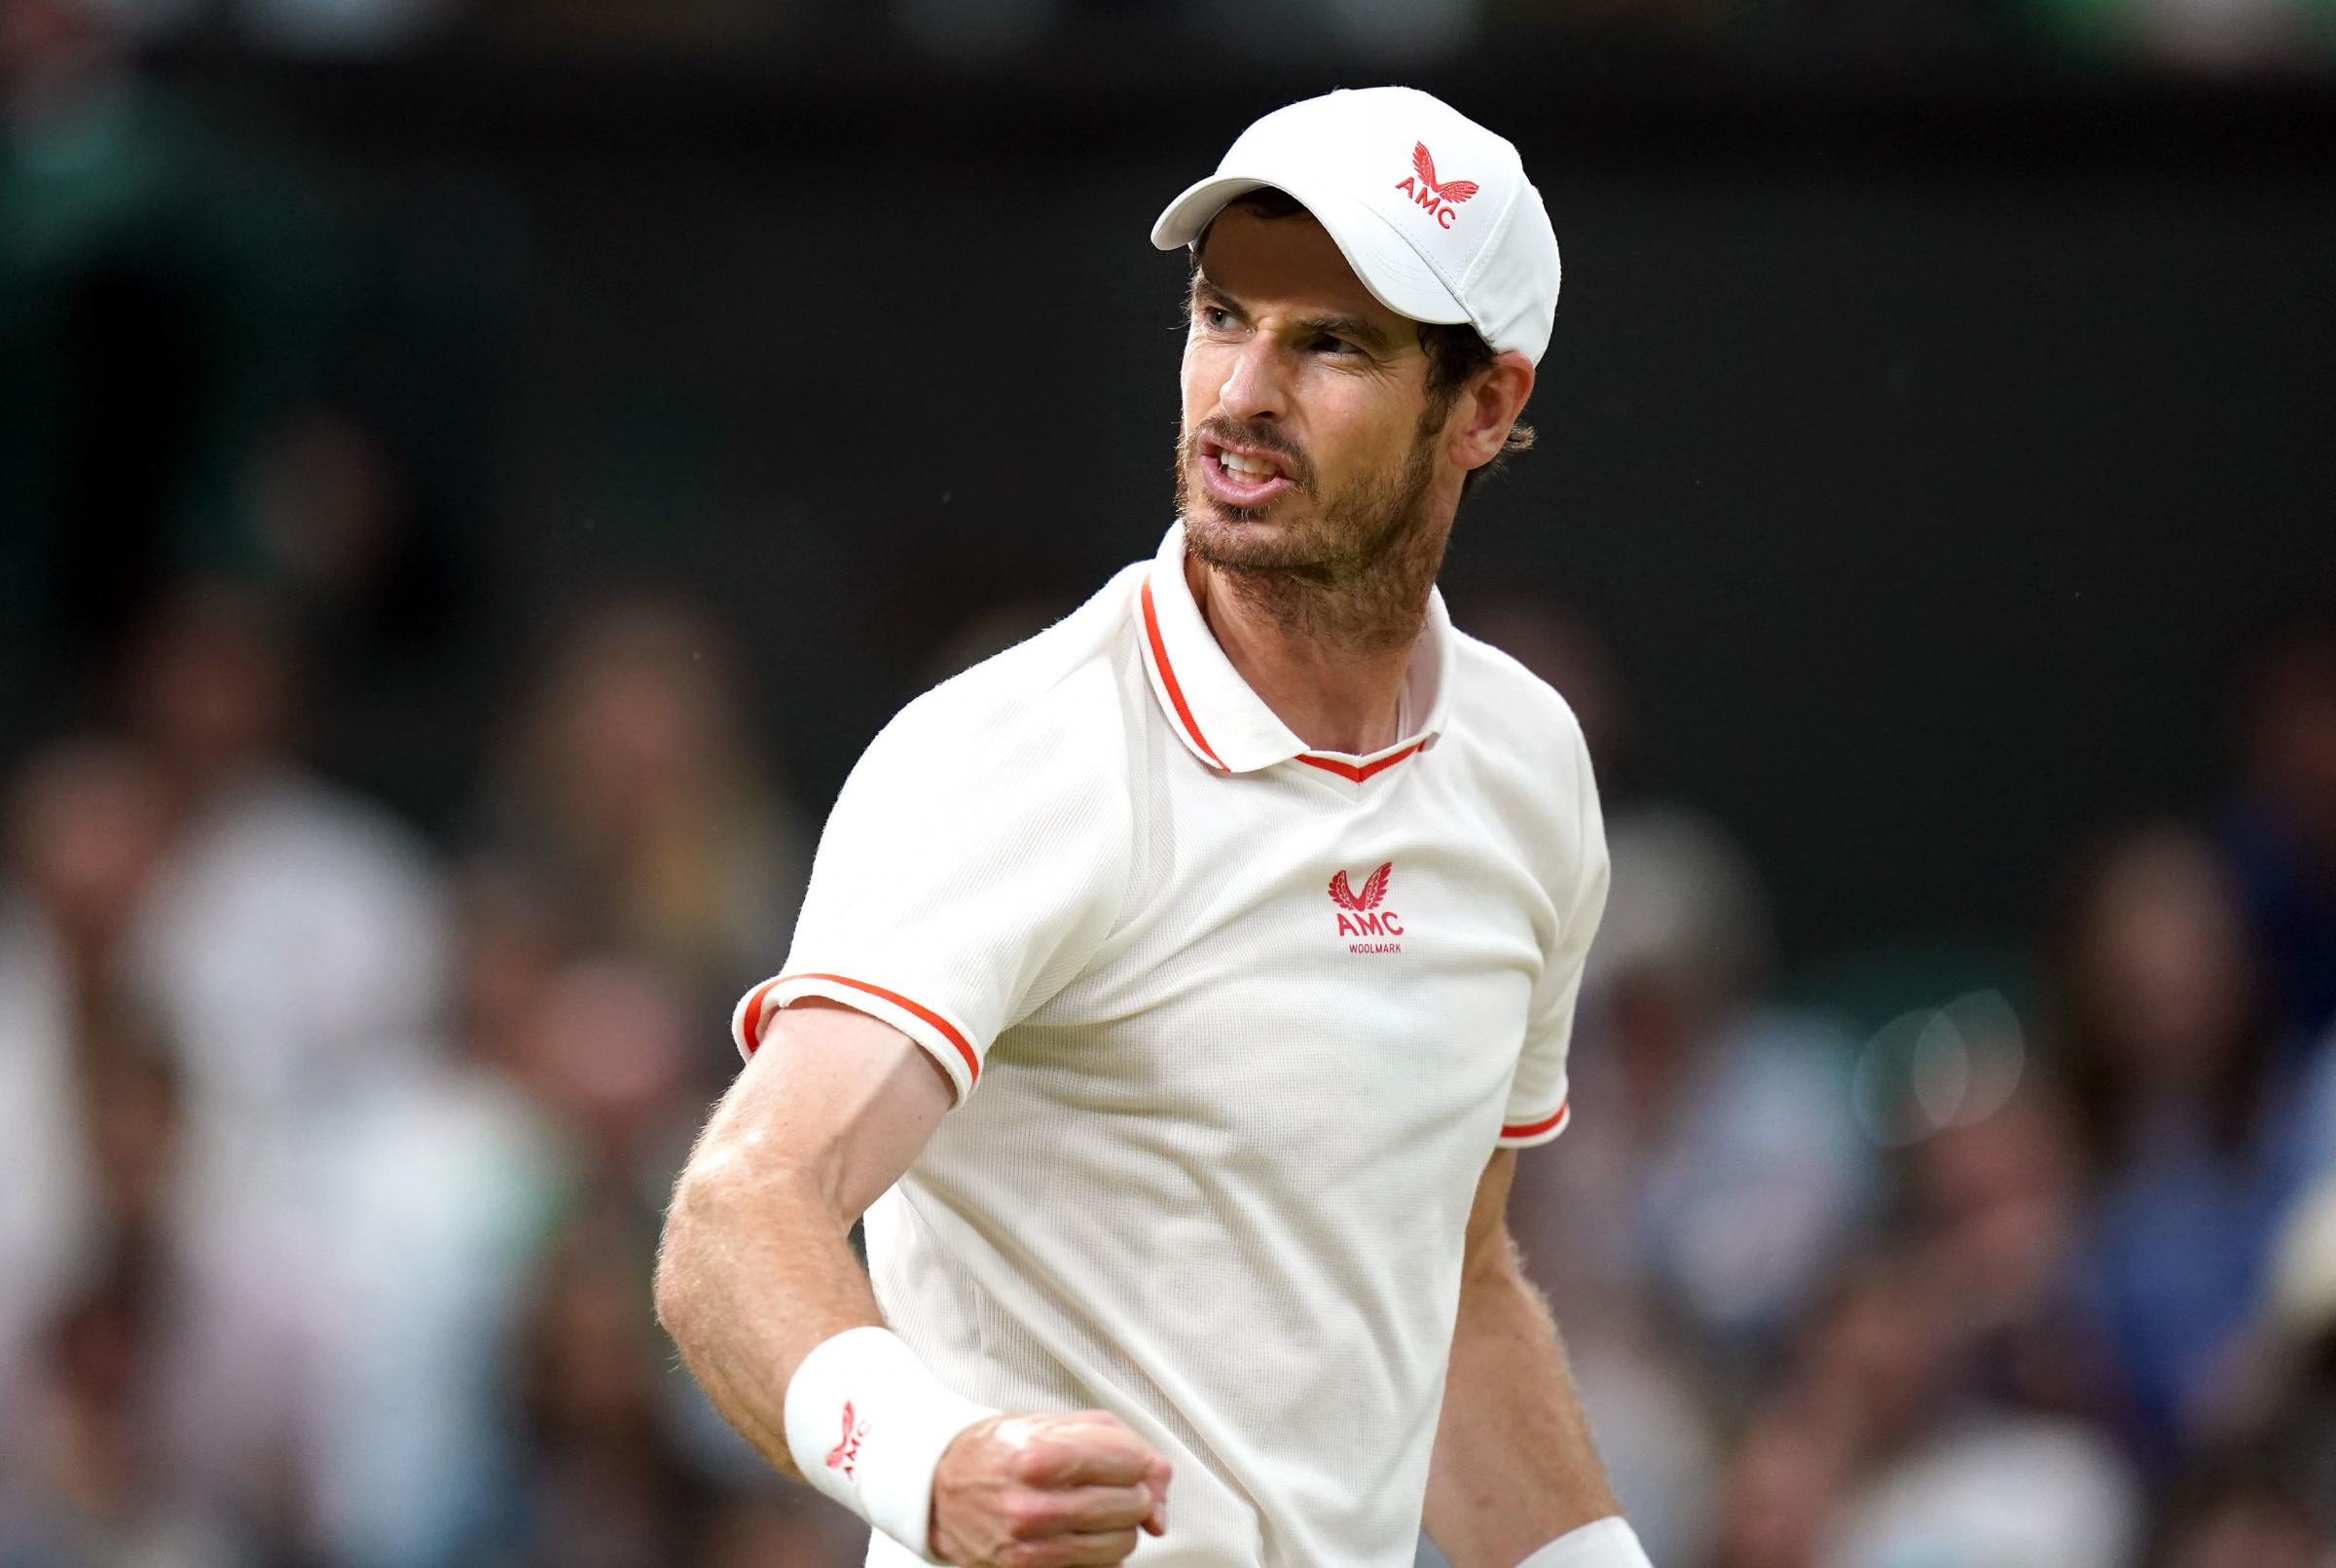 Sir Andy Murray publicised the procedure in in his recent documentary Resurfacing